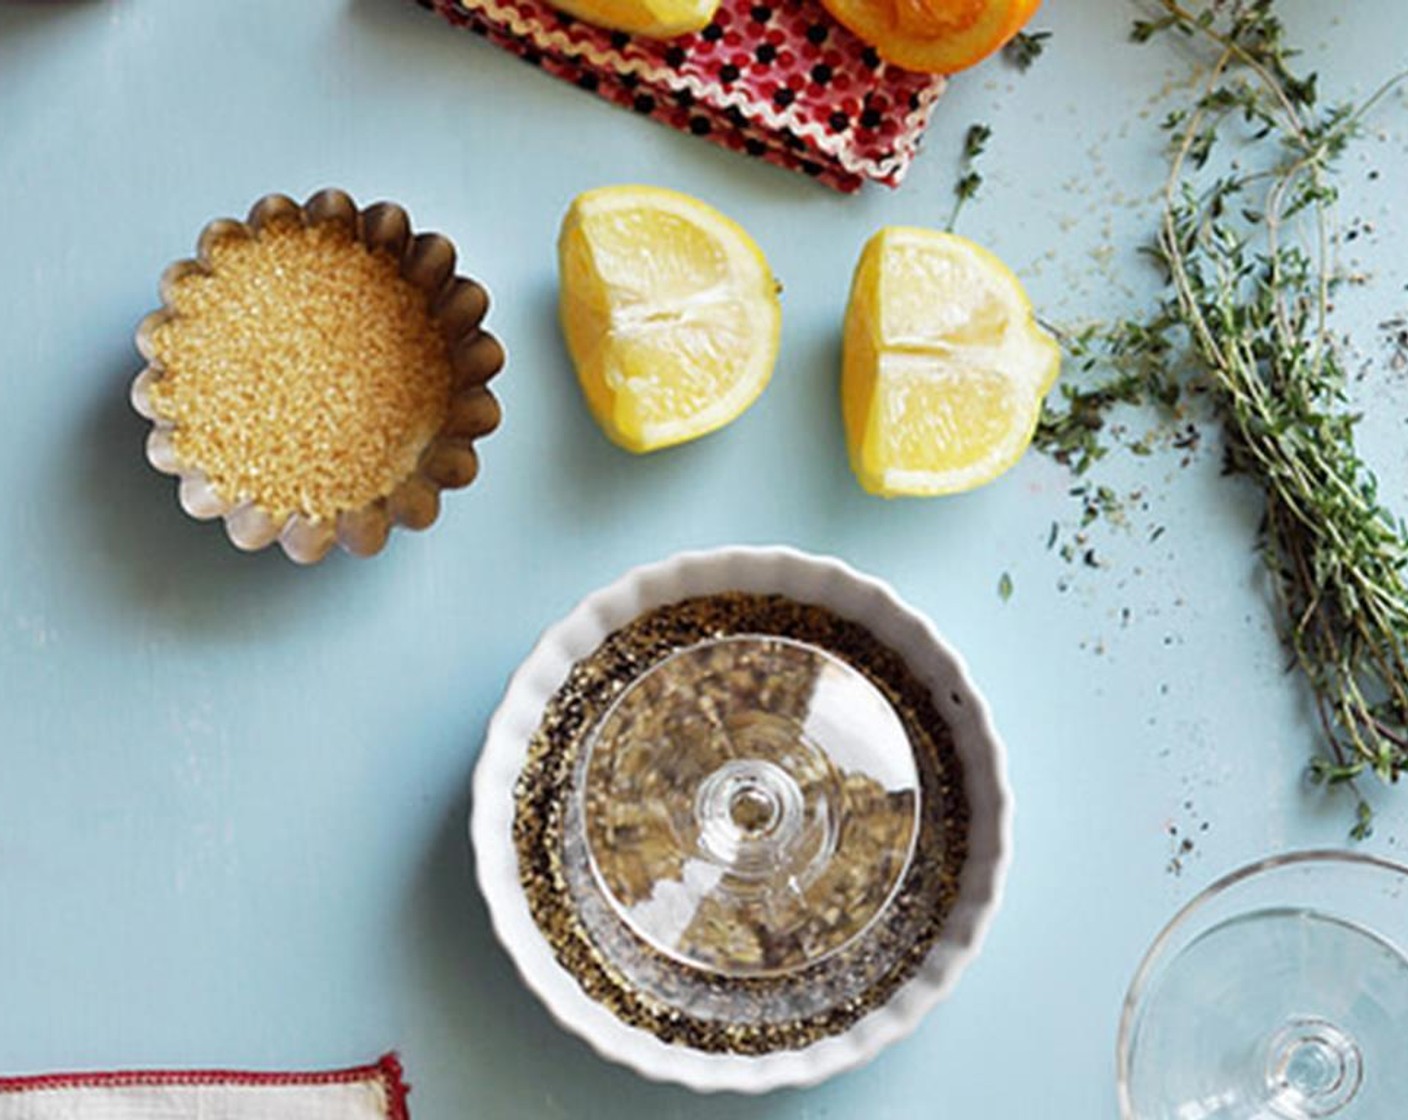 step 4 Combine the Ground Black Pepper (1/4 cup) and Raw Sugar (1/4 cup) in a shallow dish. Cut wedges out of the Lemon (1) Rub the lemon wedge along the edge of the glasses to create a glue. Then dip the glass, upside-down into the shallow dish.